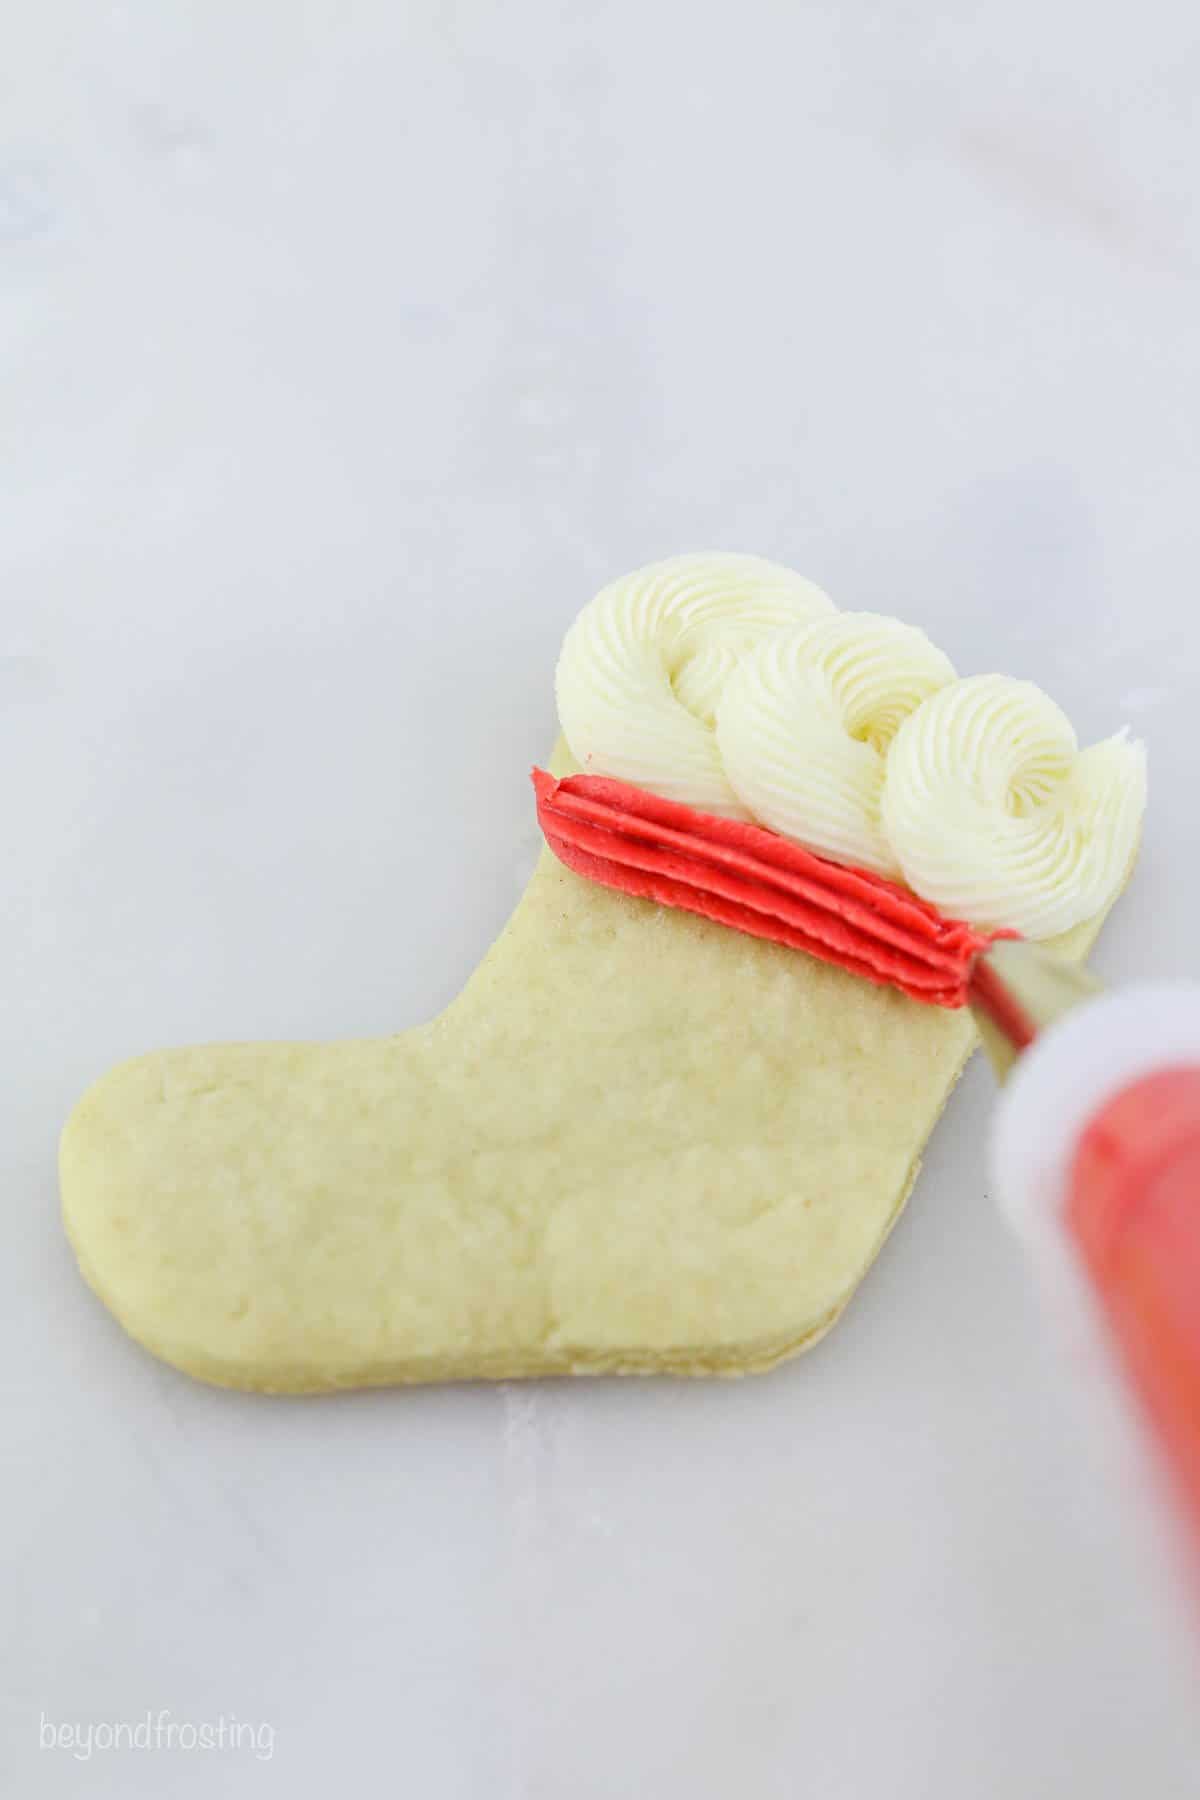 White frosting rosettes and a strip of red frosting on a stocking shaped sugar cookie